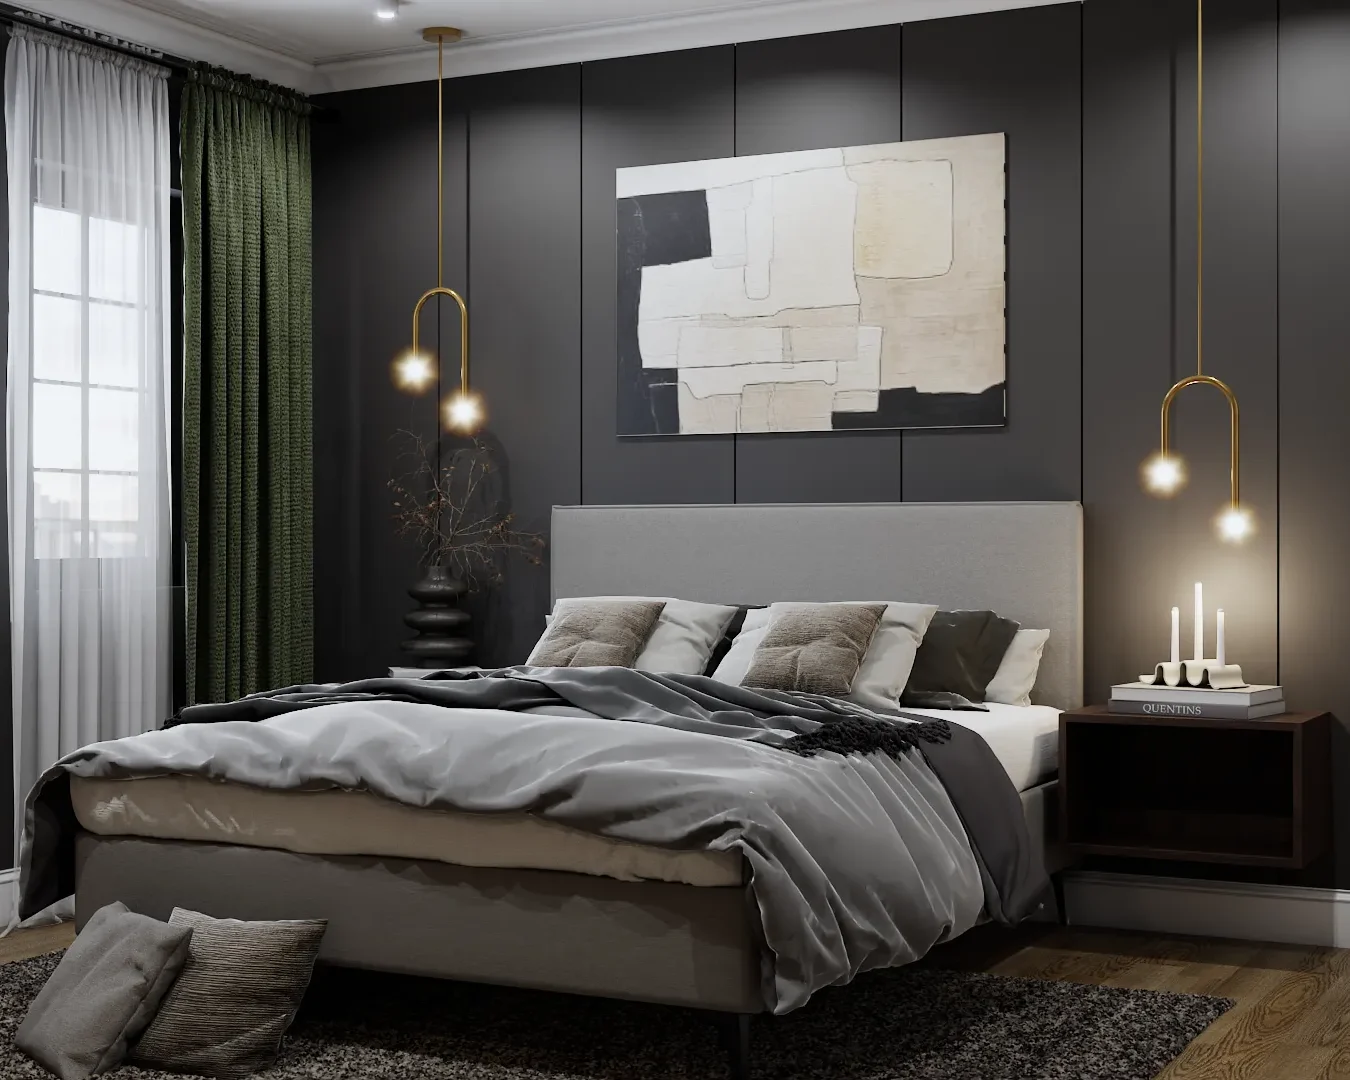 Sophisticated bedroom featuring dark walls, modern art above the bed, and golden accents, exuding elegance and artistic flair. Design by Debora, an online interior design service.